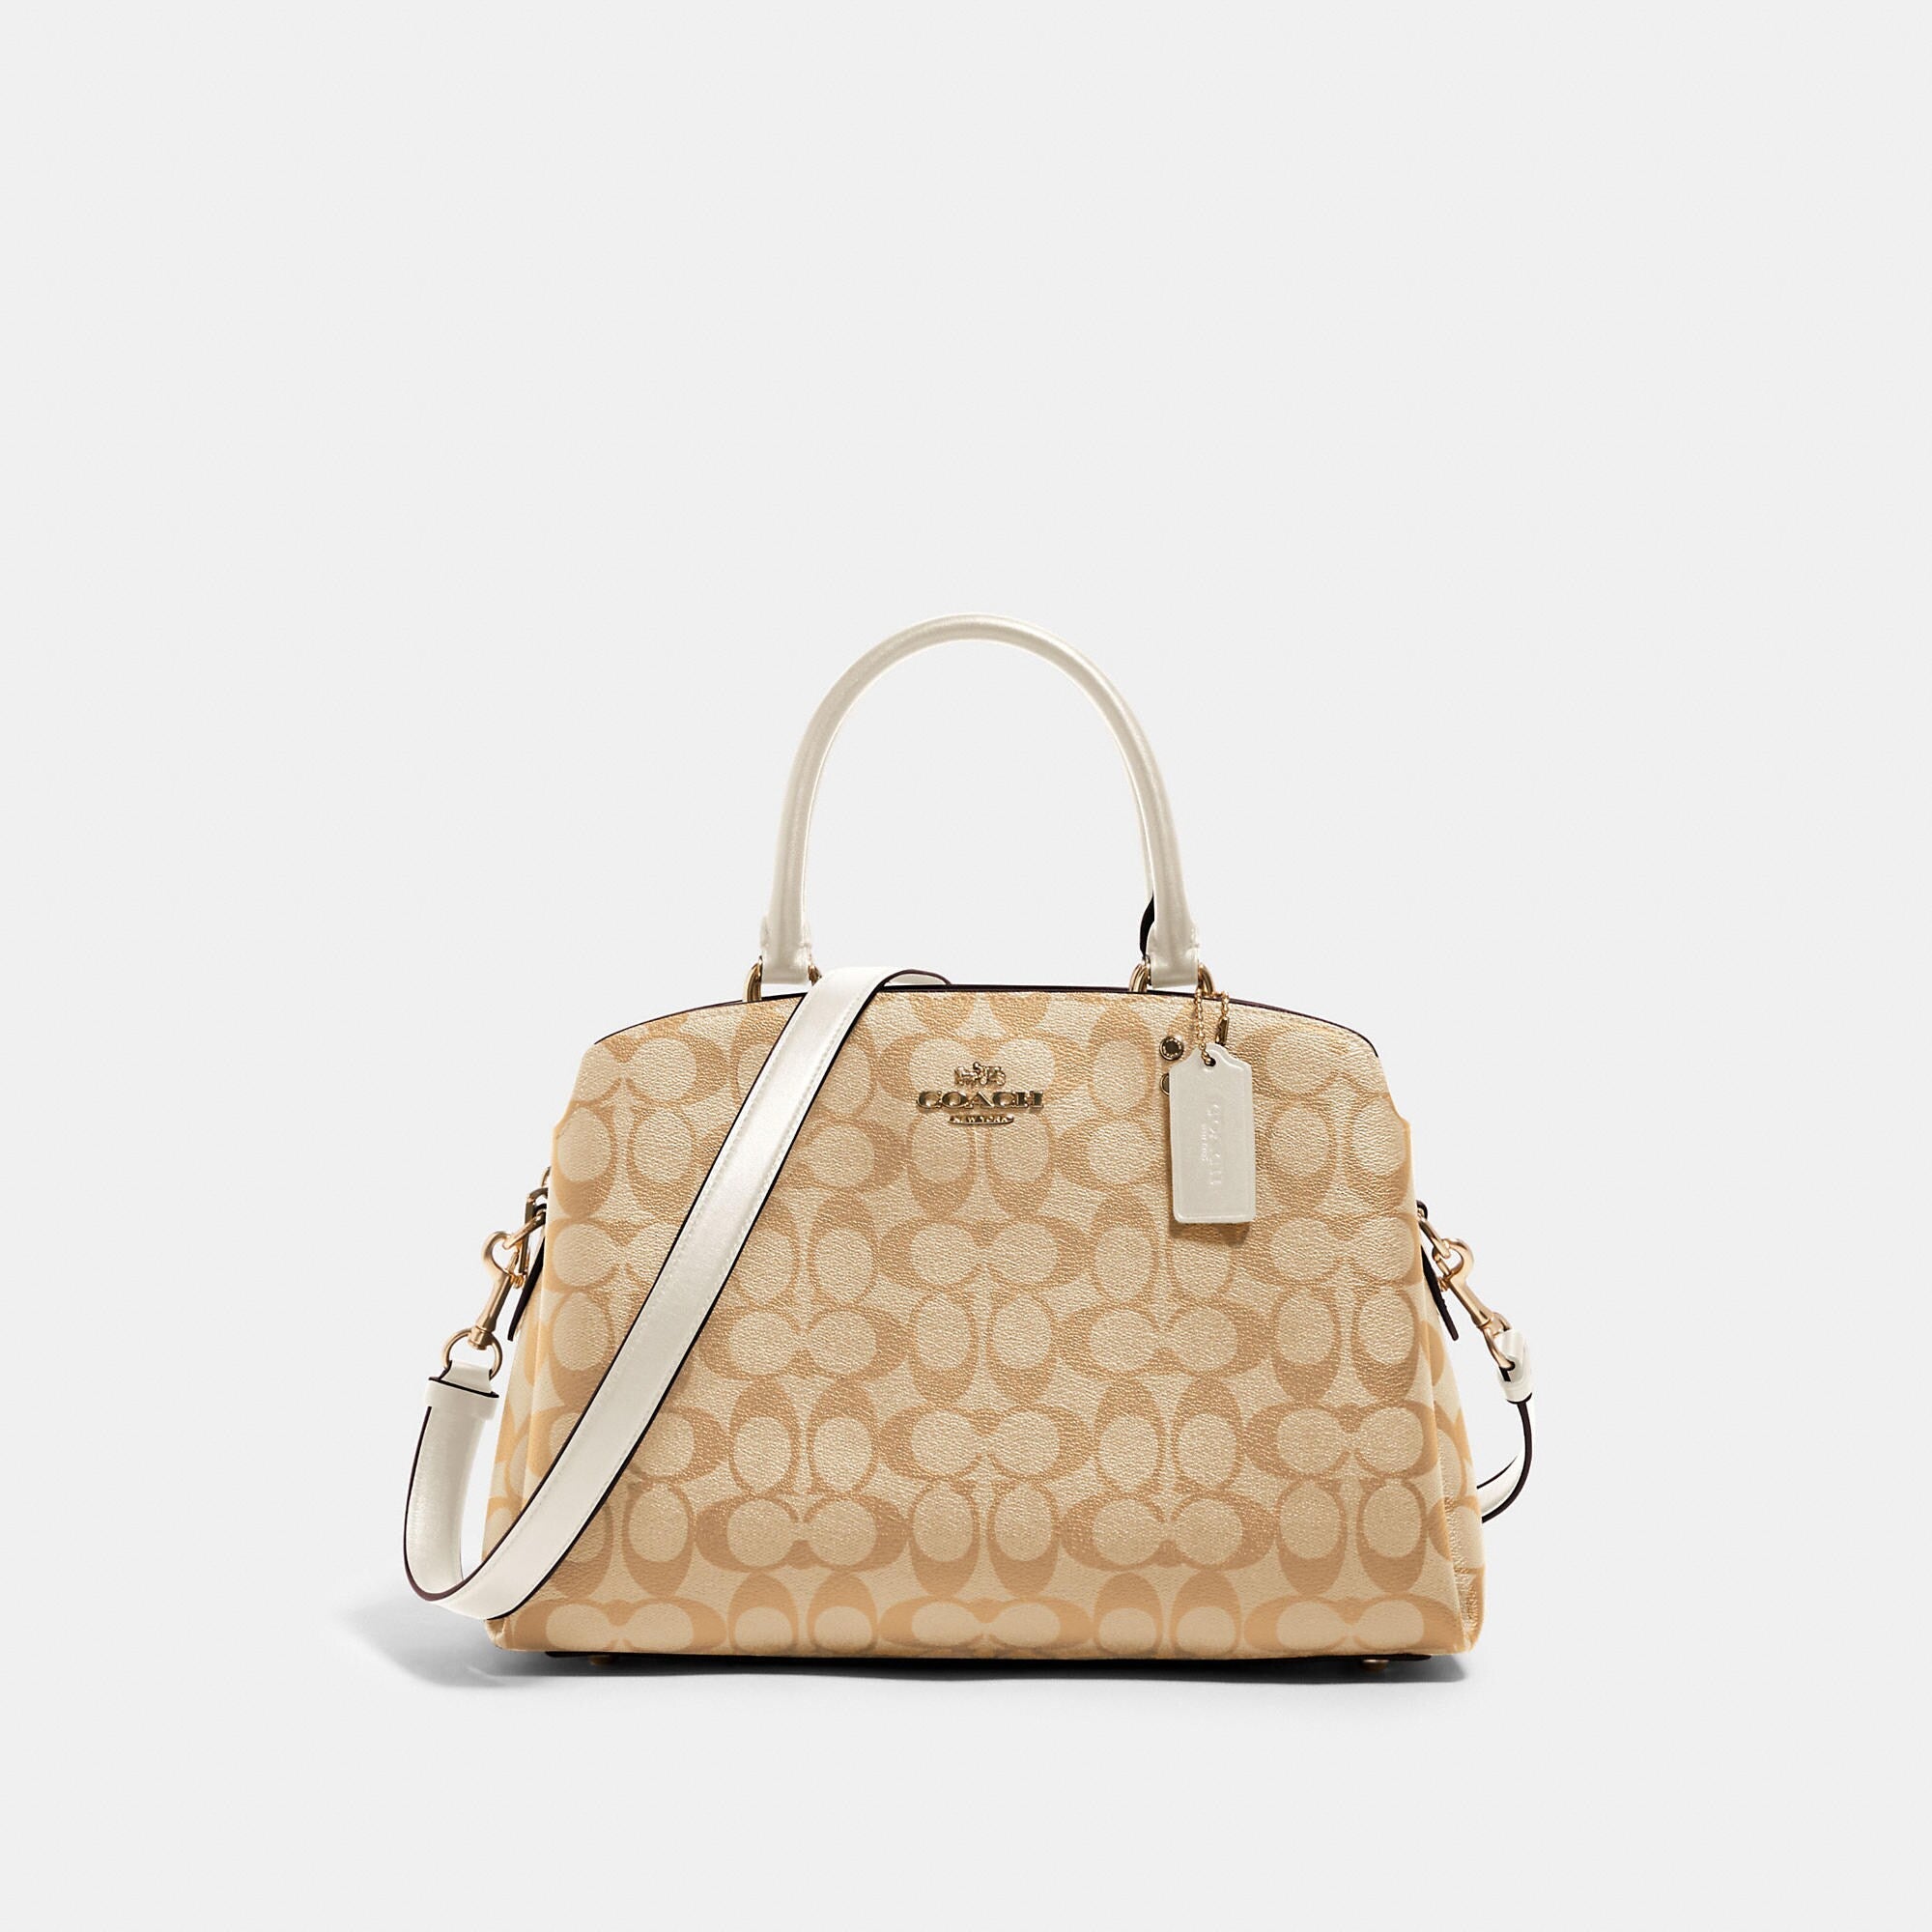 Coach Outlet Lillie Carryall In Signature Canvas - TJ Outlet